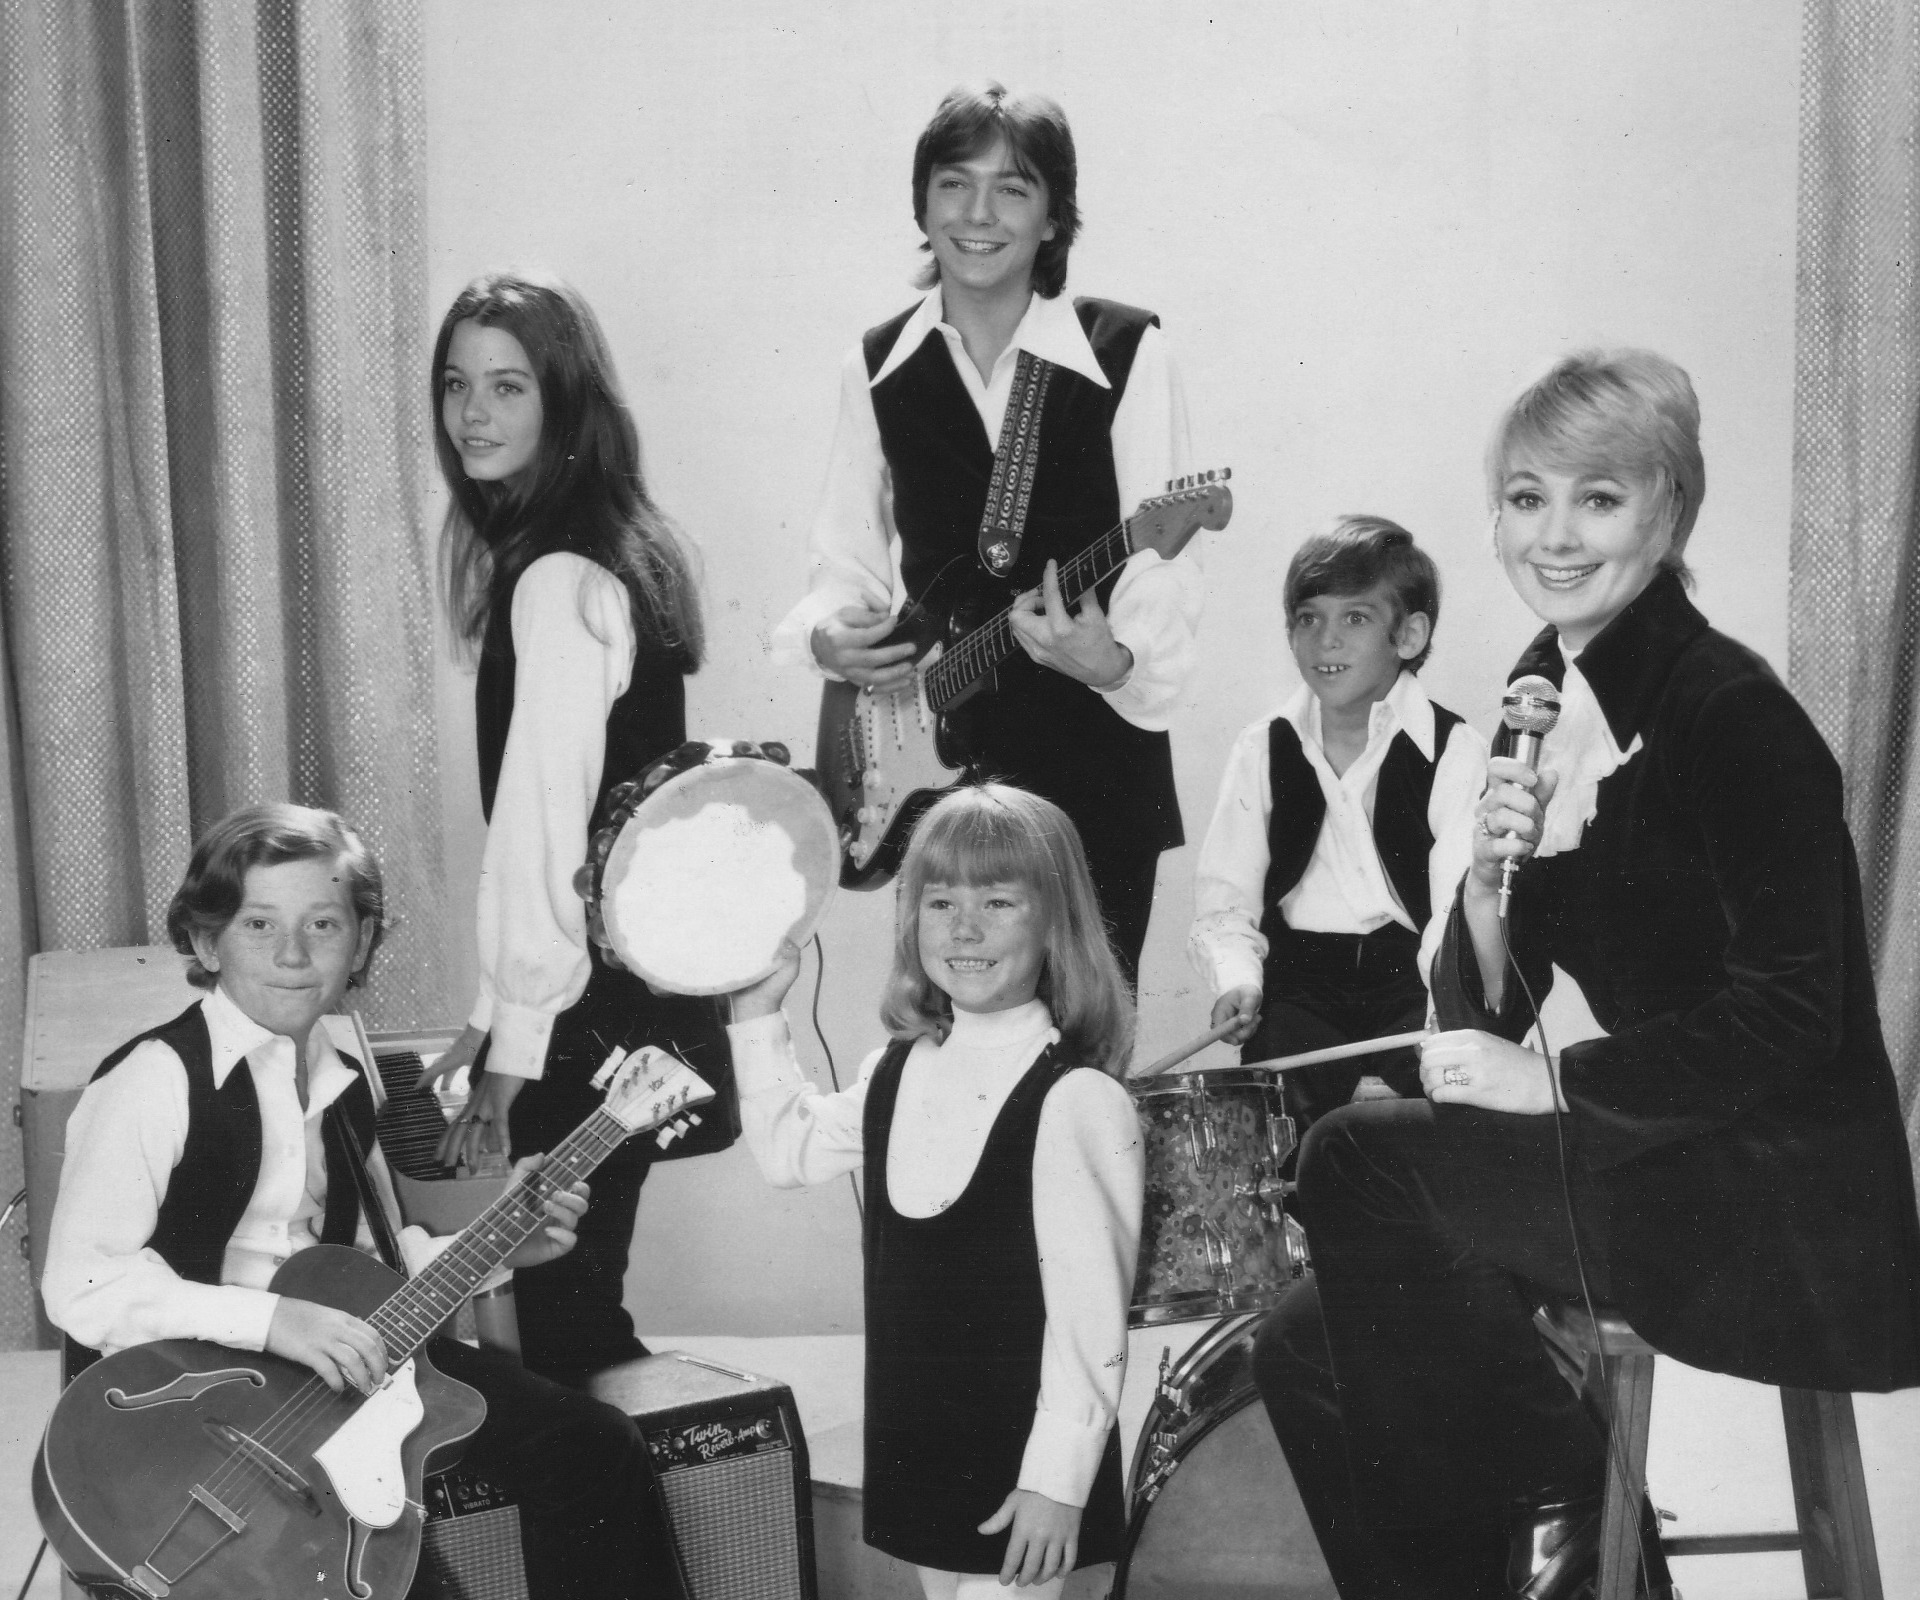 A much-loved member of the ‘Partridge Family’ has passed away, aged 52.